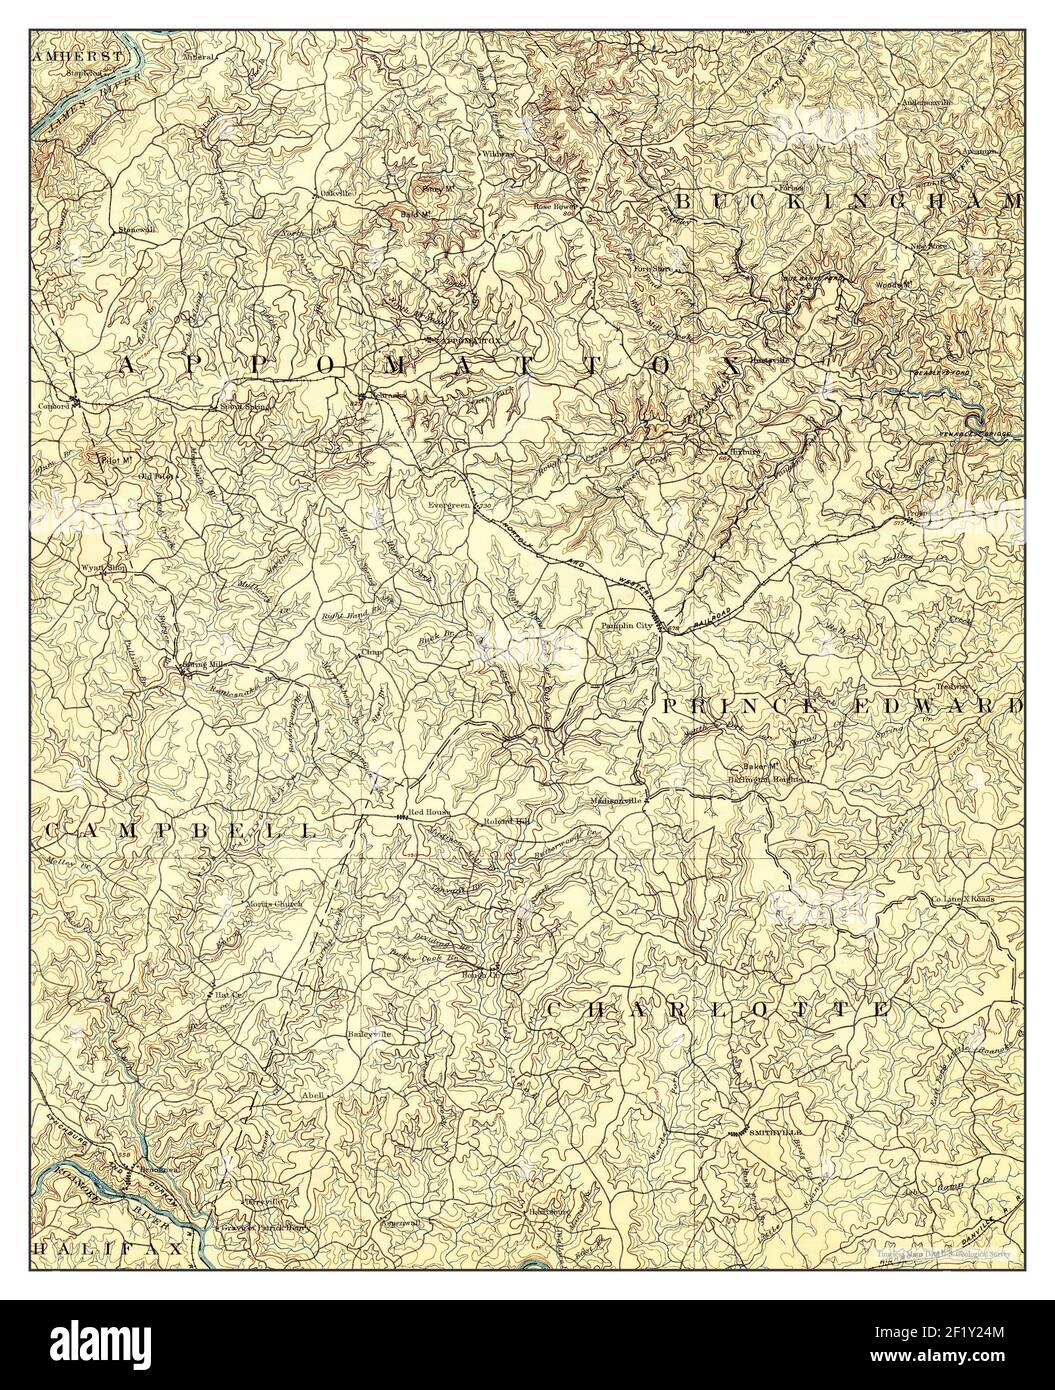 Appomattox, Virginia, map 1892, 1:125000, United States of America by Timeless Maps, data U.S. Geological Survey Stock Photo